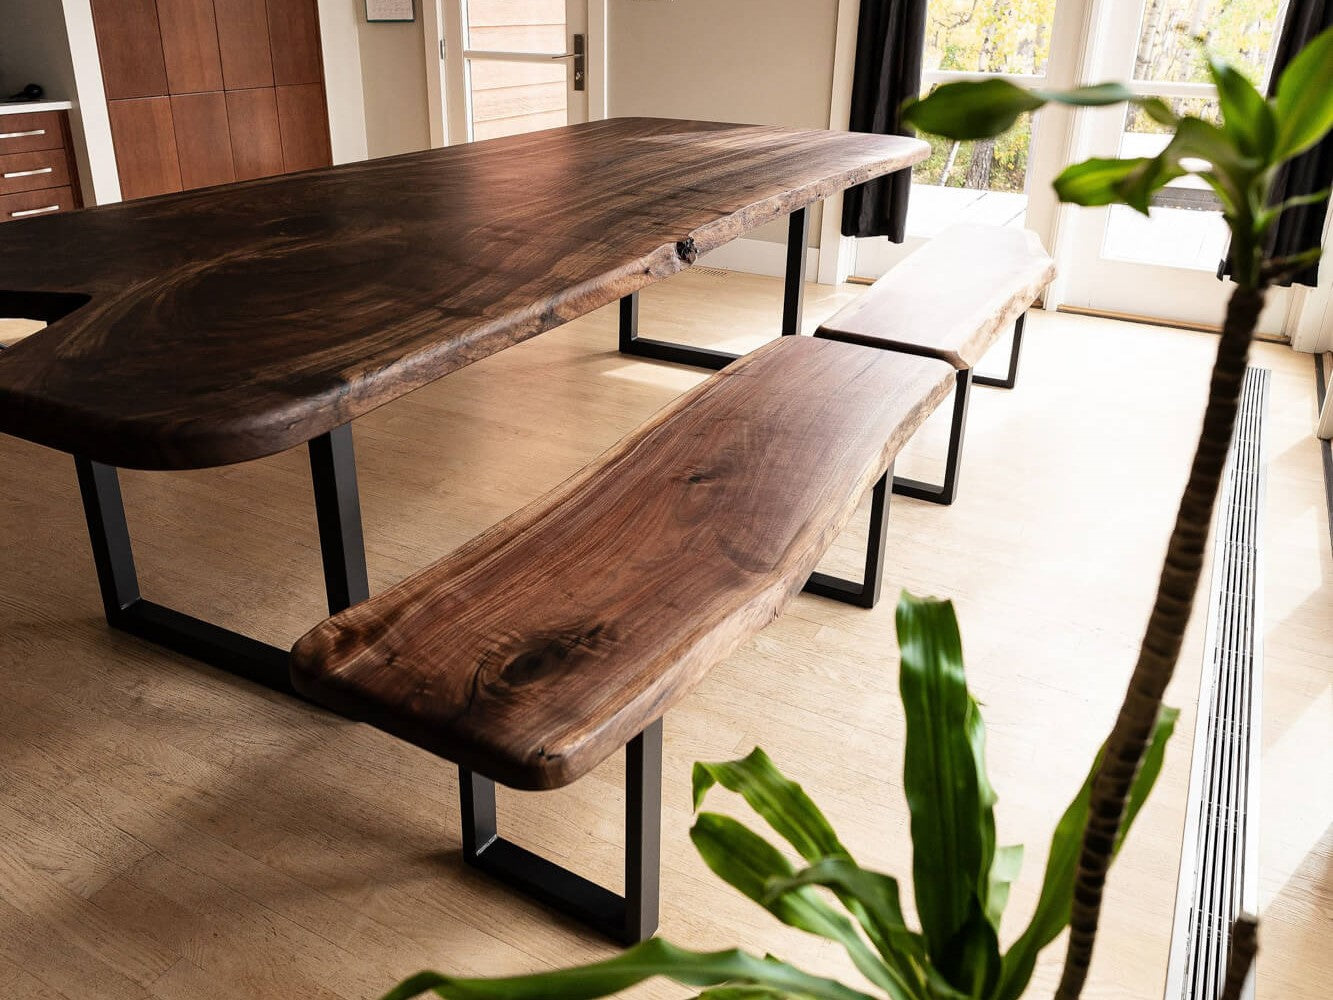 A large claro walnut dining table with two benches.